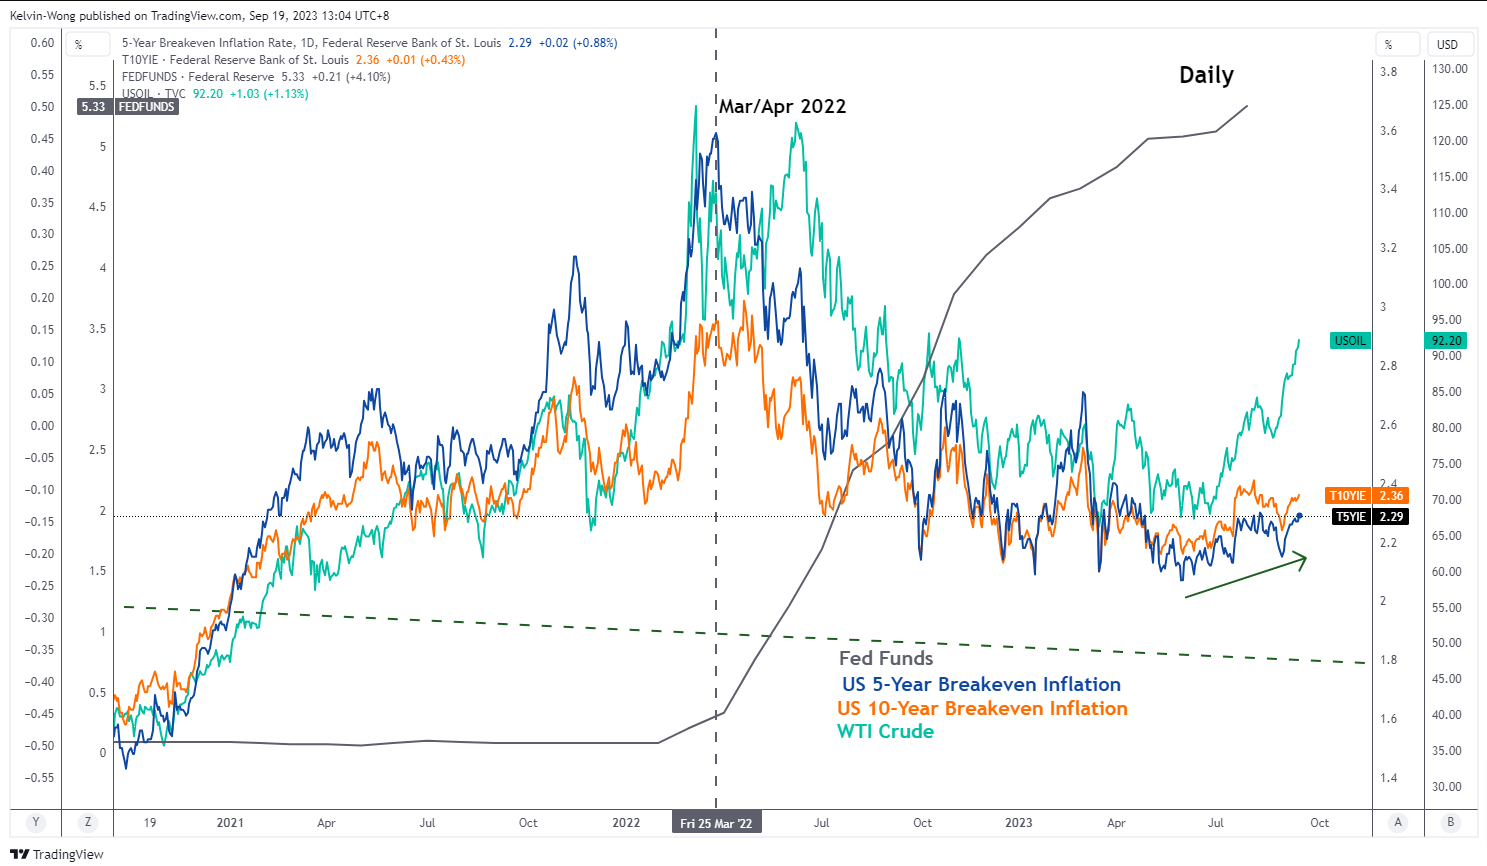 Correlation between WTI crude oil and US 5-year & 10-year breakeven inflation rates